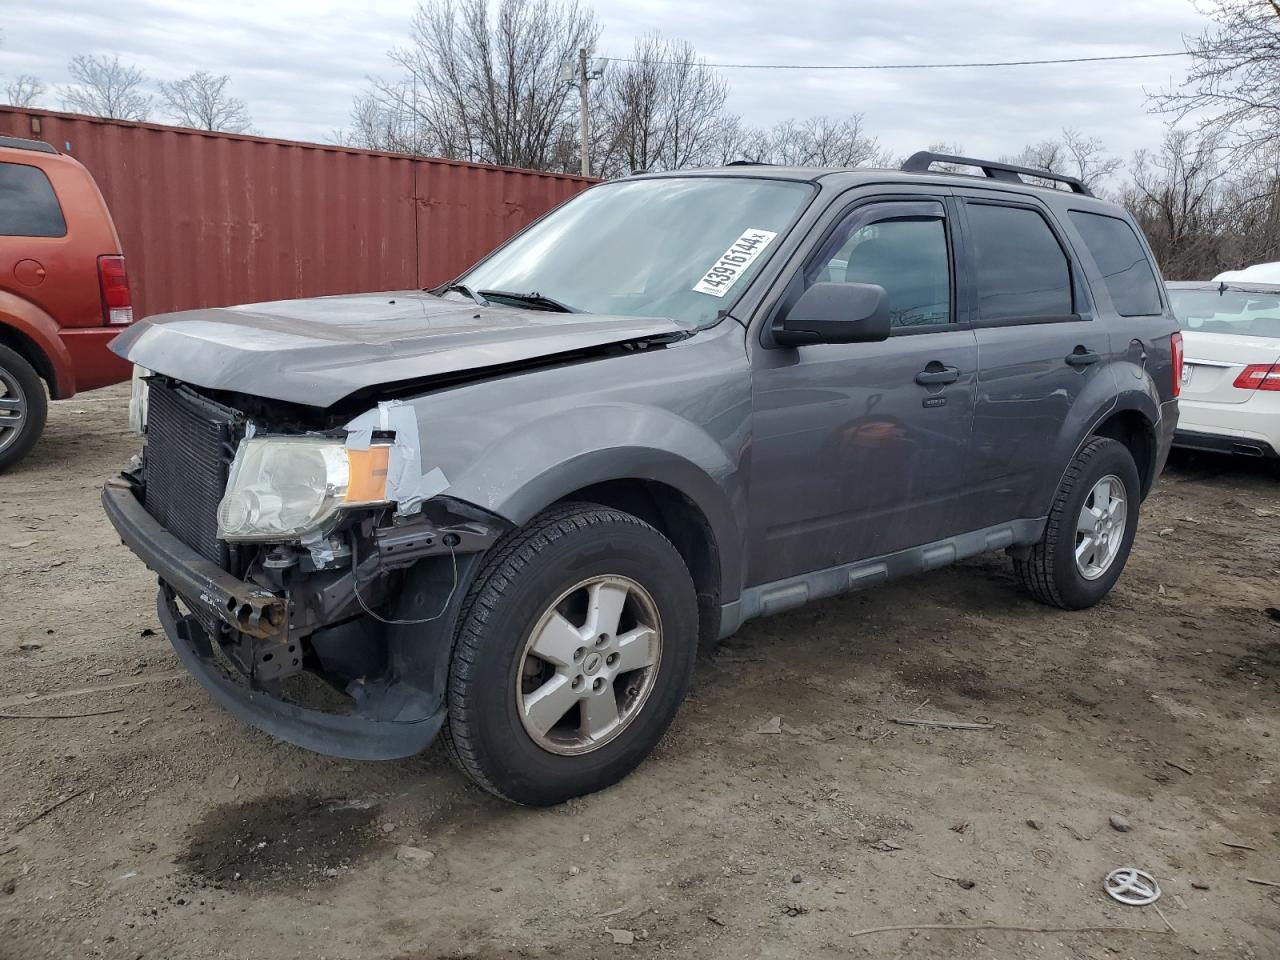 vin: 1FMCU9DGXCKA02095 1FMCU9DGXCKA02095 2012 ford escape 3000 for Sale in 21225, Md - Baltimore East, Baltimore, USA